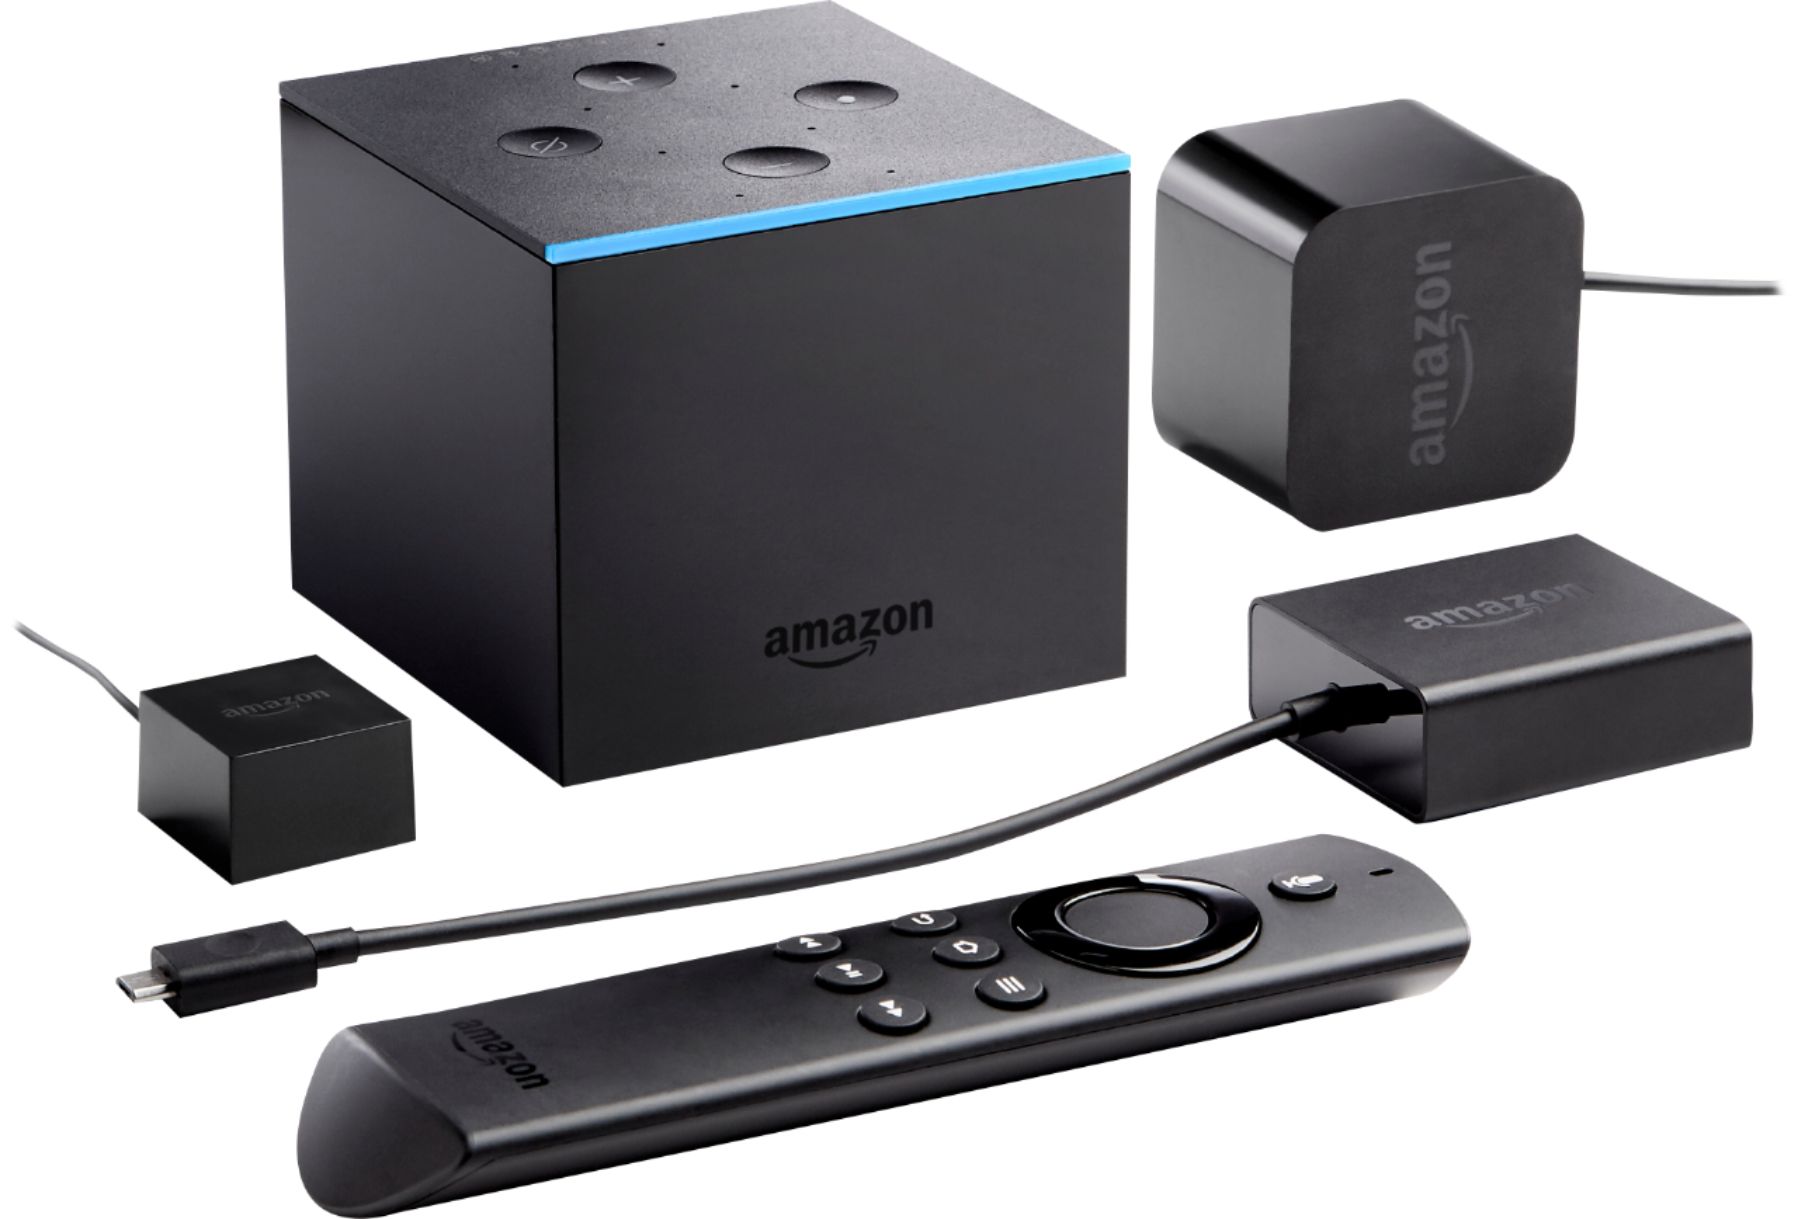 Fire TV Cube review: Smart speaker, streaming player rolled into one